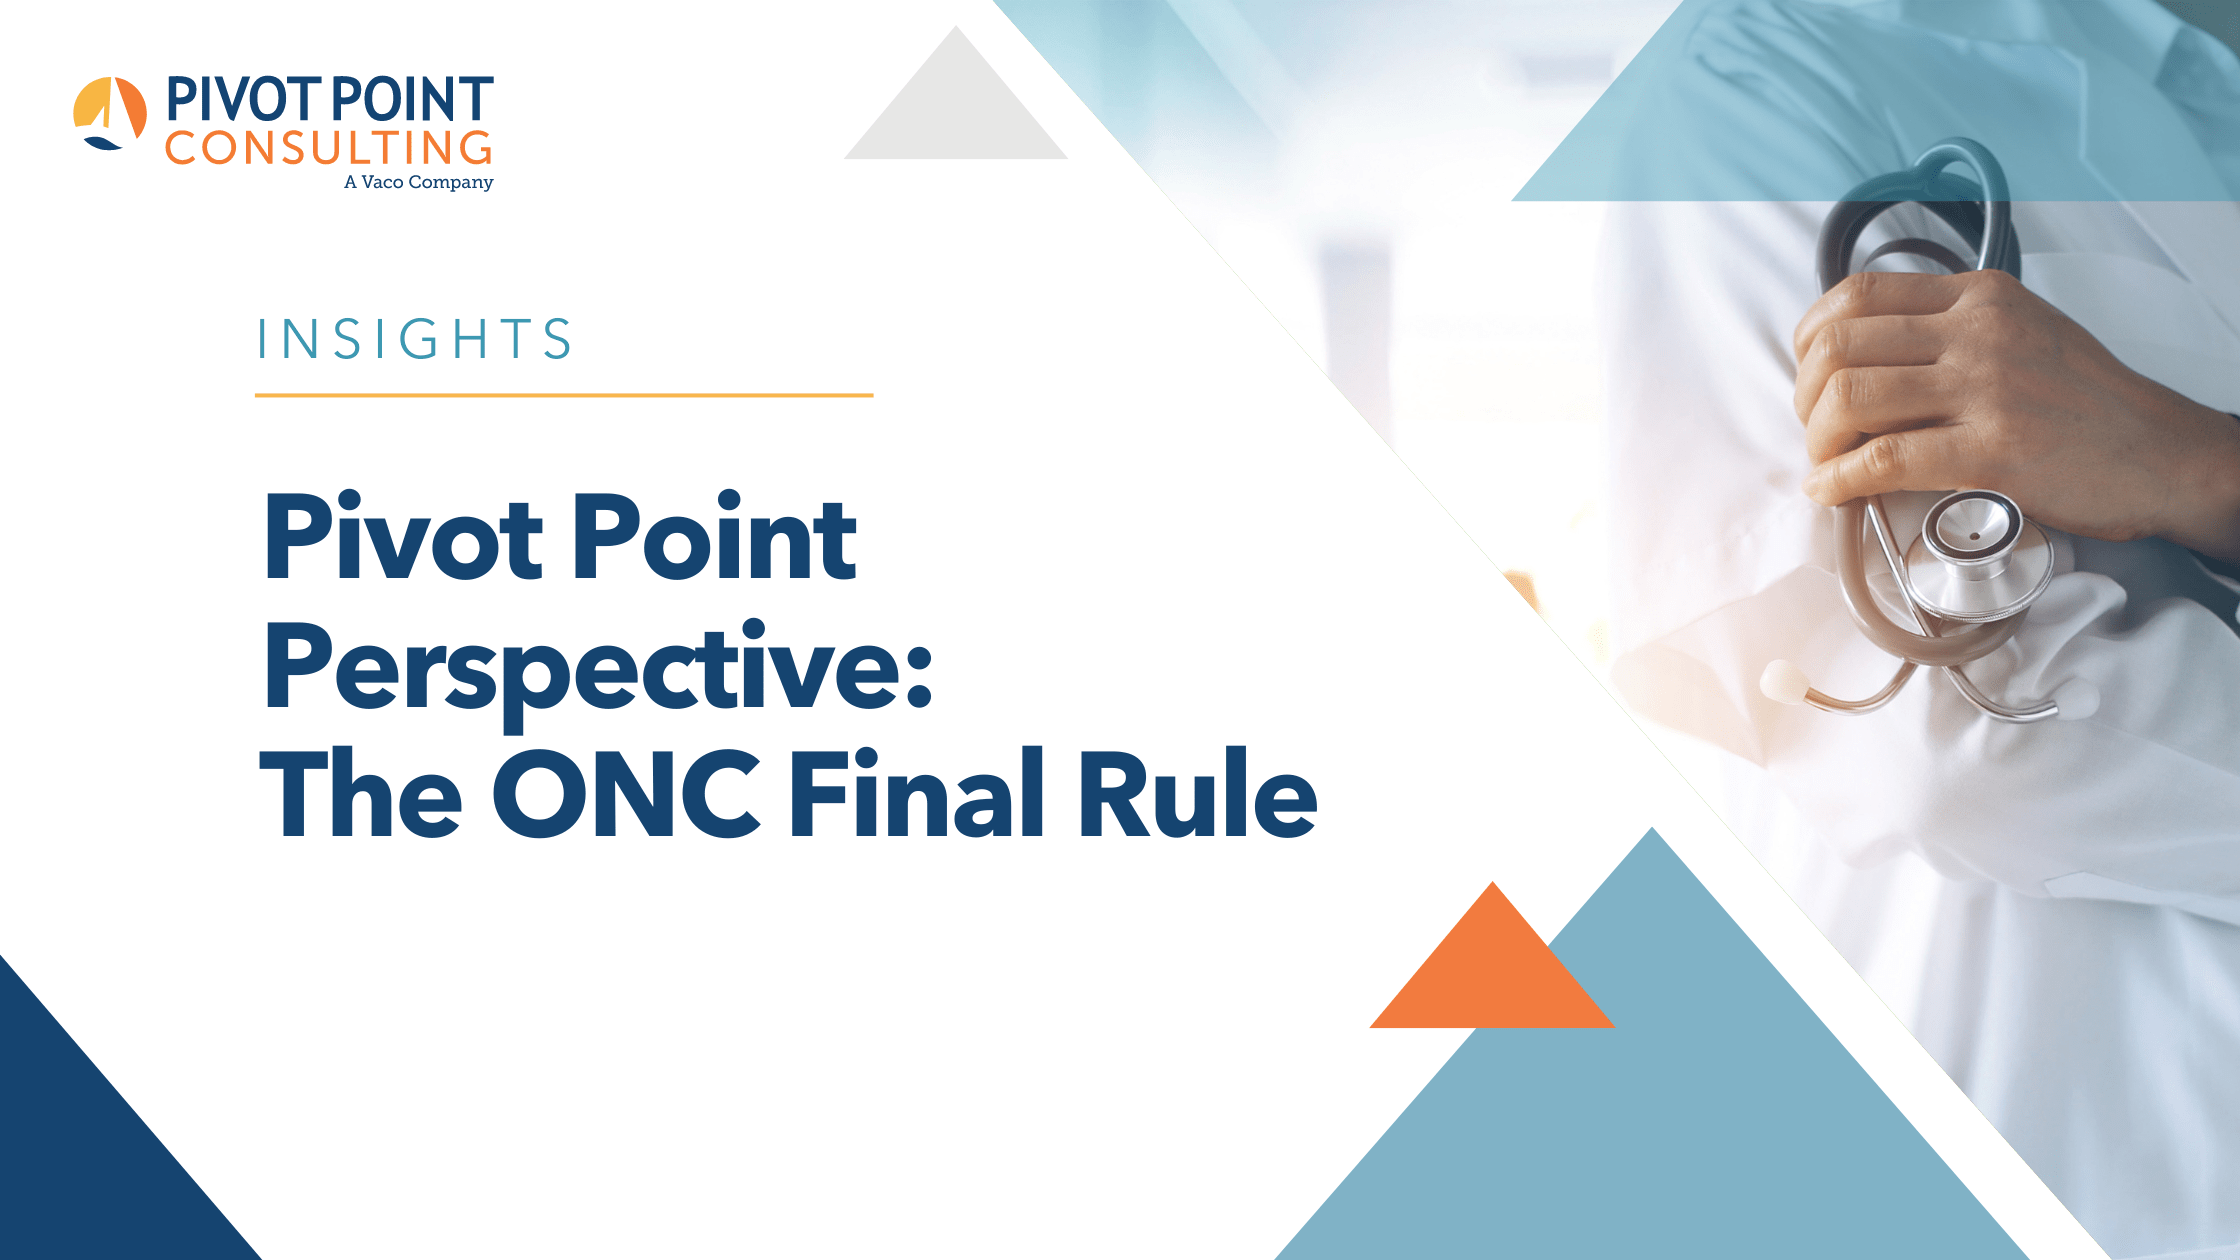 Pivot Point Perspective: The ONC Final Rule blog post